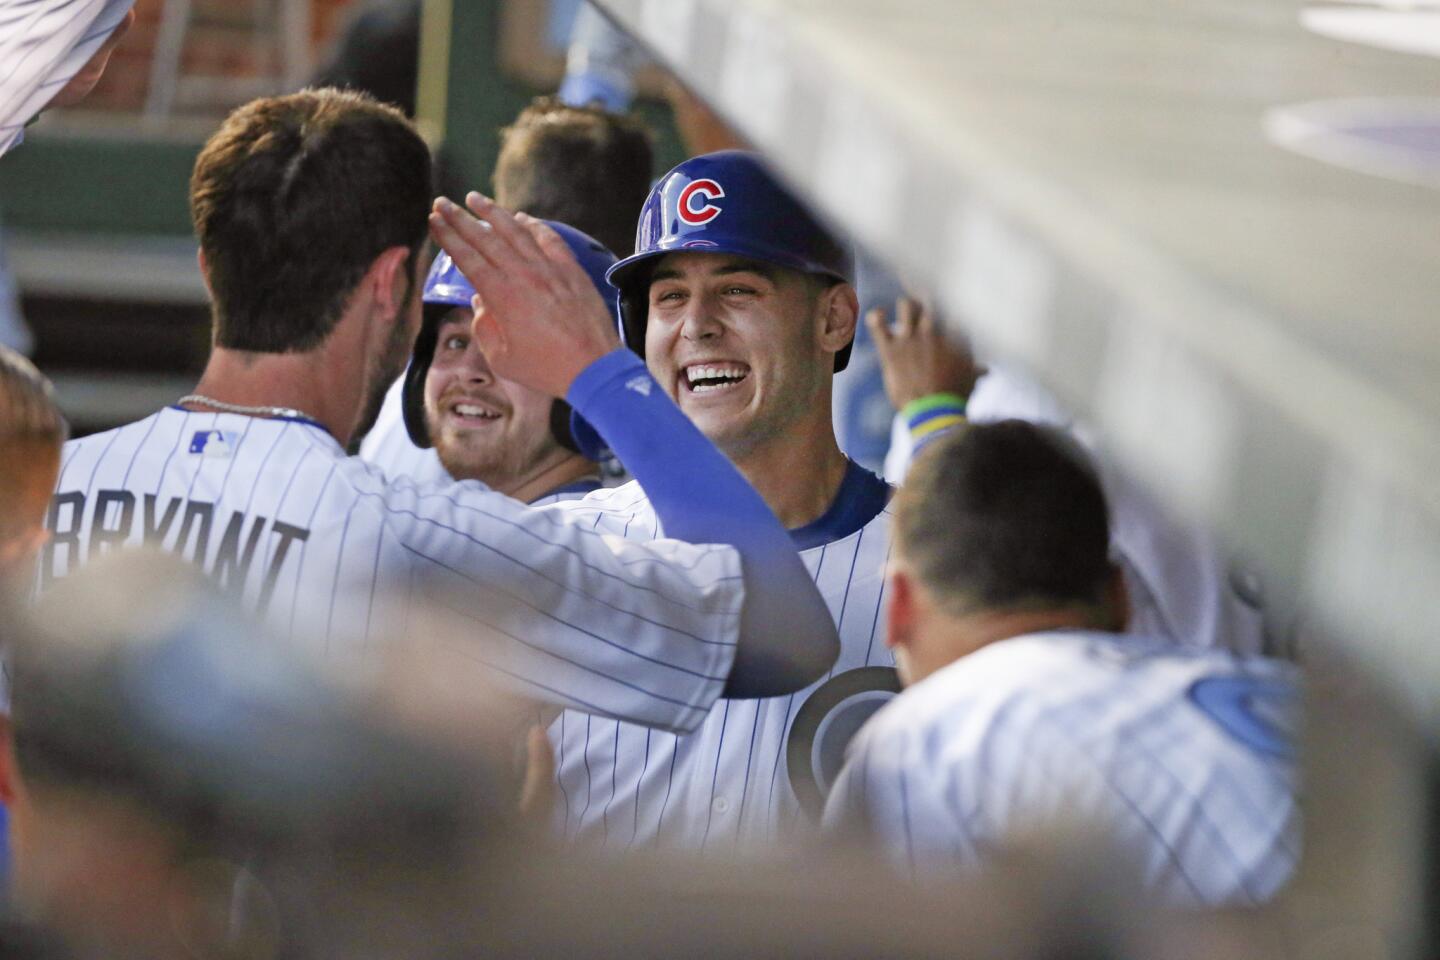 Bryzzo in action